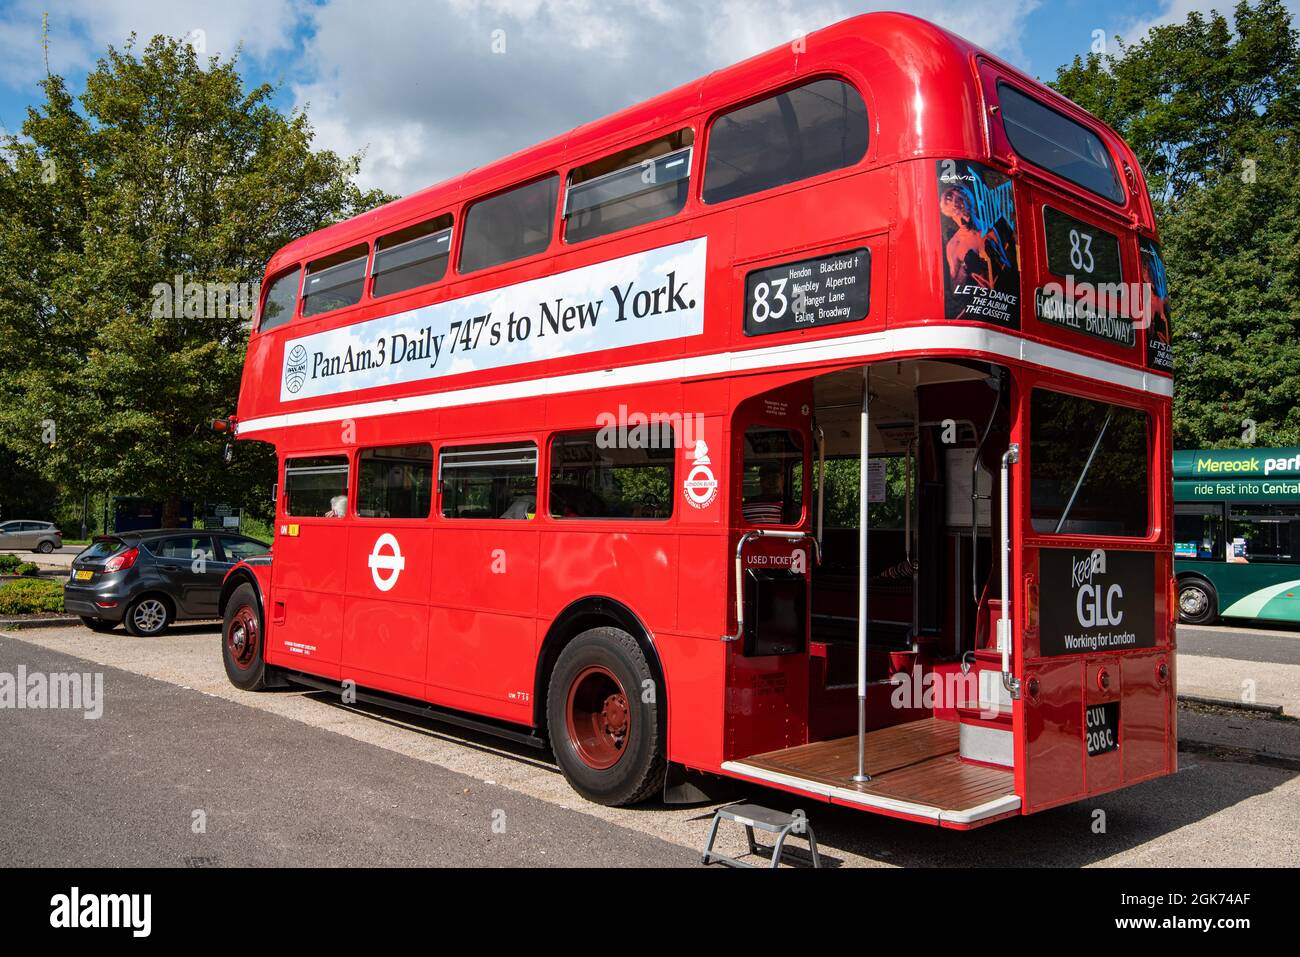 A classic red London doubler decker bus with a vintage advert for Pan Am flights to New York on 747s on the side, Winchester, UK Stock Photo